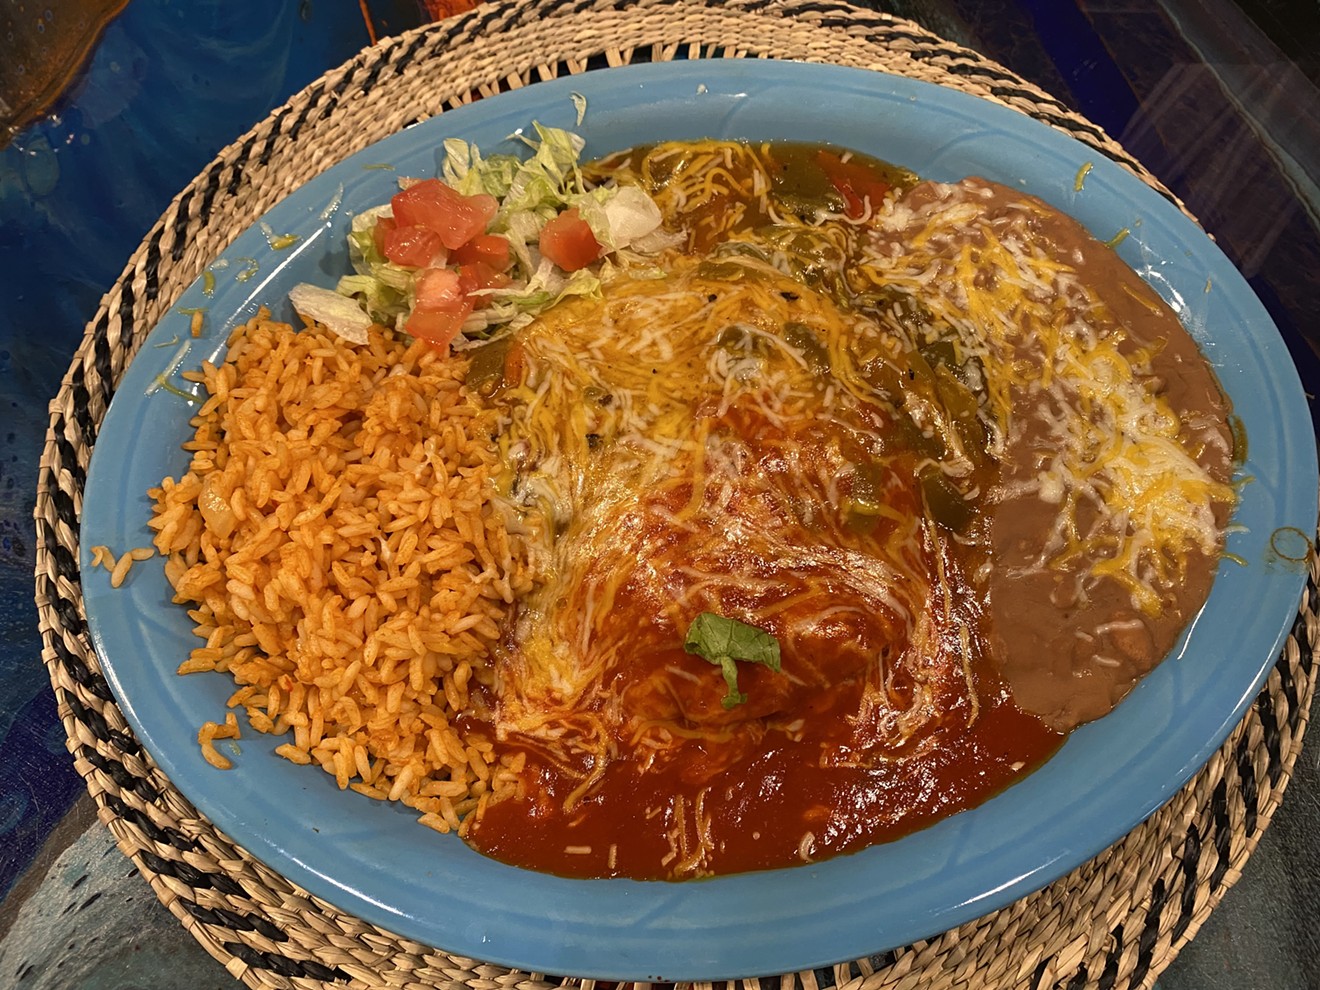 The No. 2 combination plate includes a cheese enchilada, tamale, beef taco, chile relleno, and guacamole.